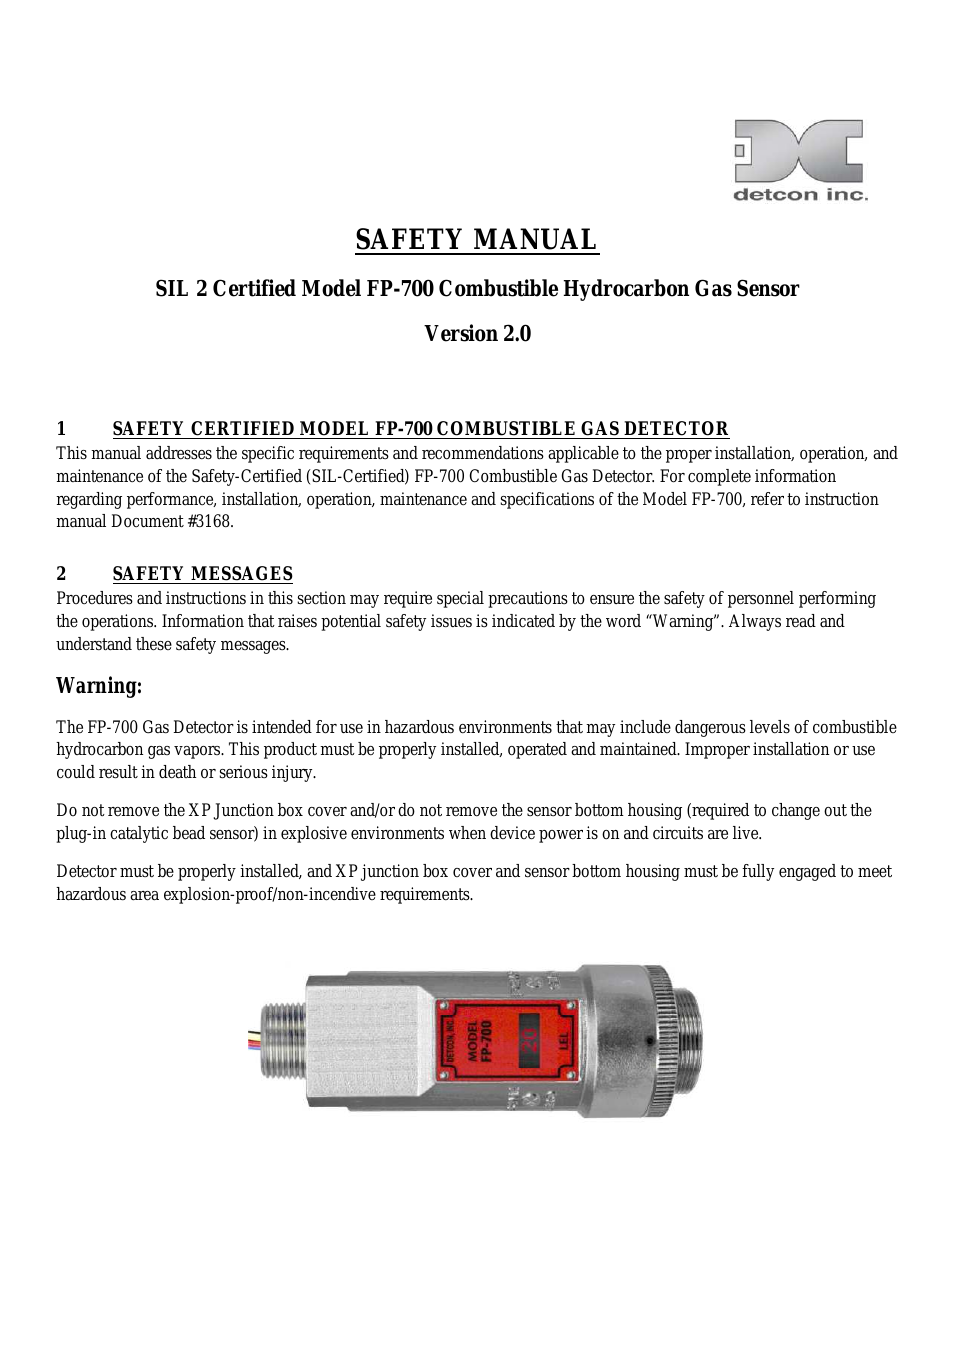 FP-700 SIL 2 Safety Manual